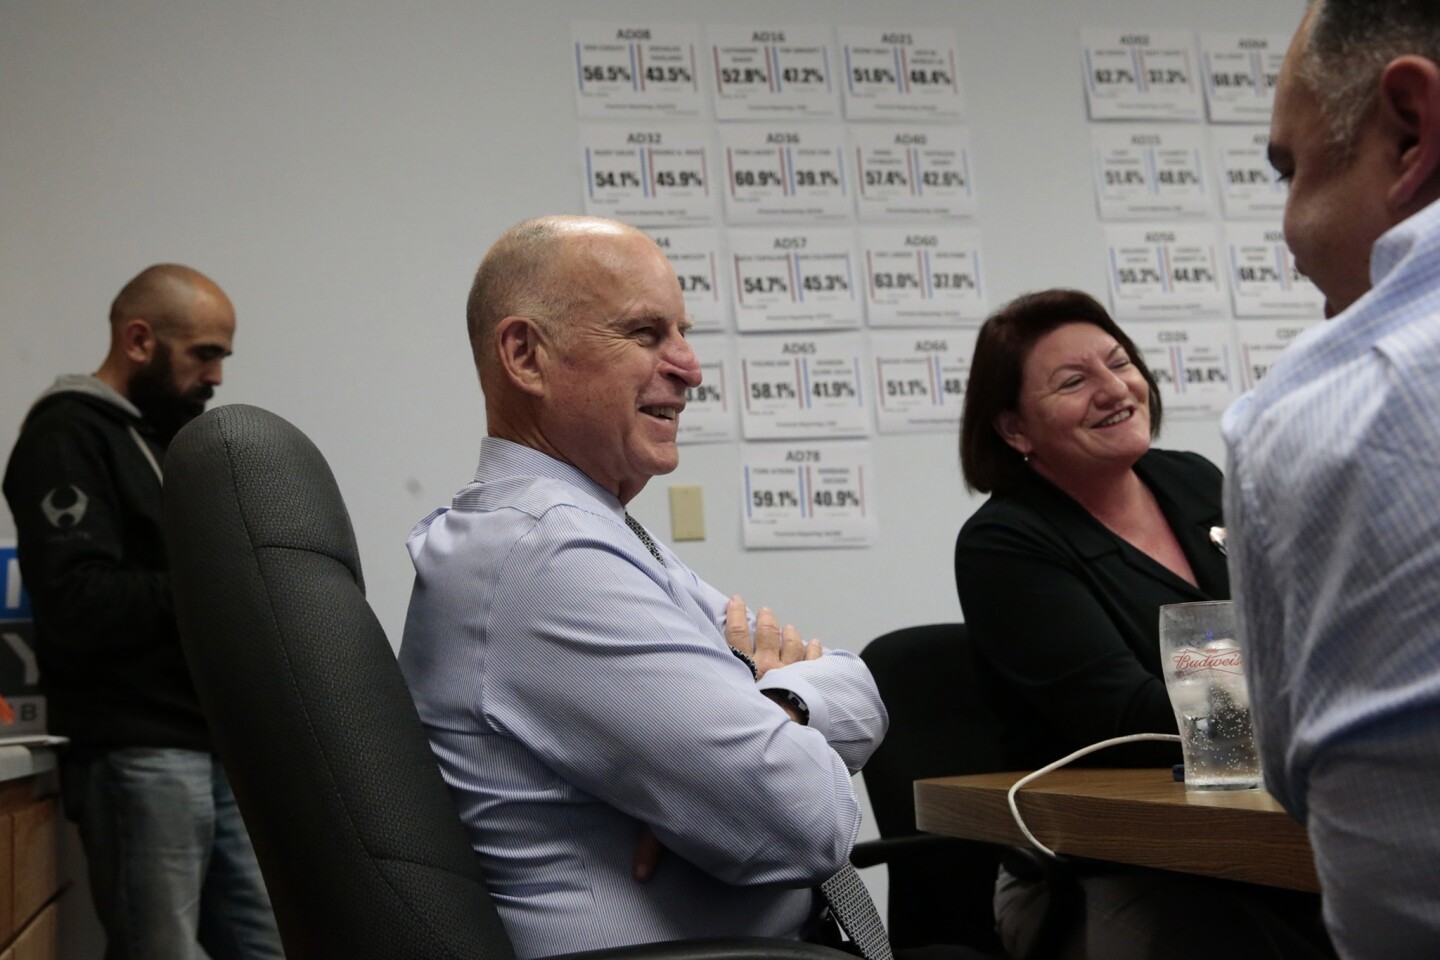 Relaxed after his easy victory over challenger Neel Kashkari, Gov. Jerry Brown checks the progress of state Democratic candidates at campaign headquarters with former Assembly Speaker John Perez, right, and current Speaker Toni Atkins.